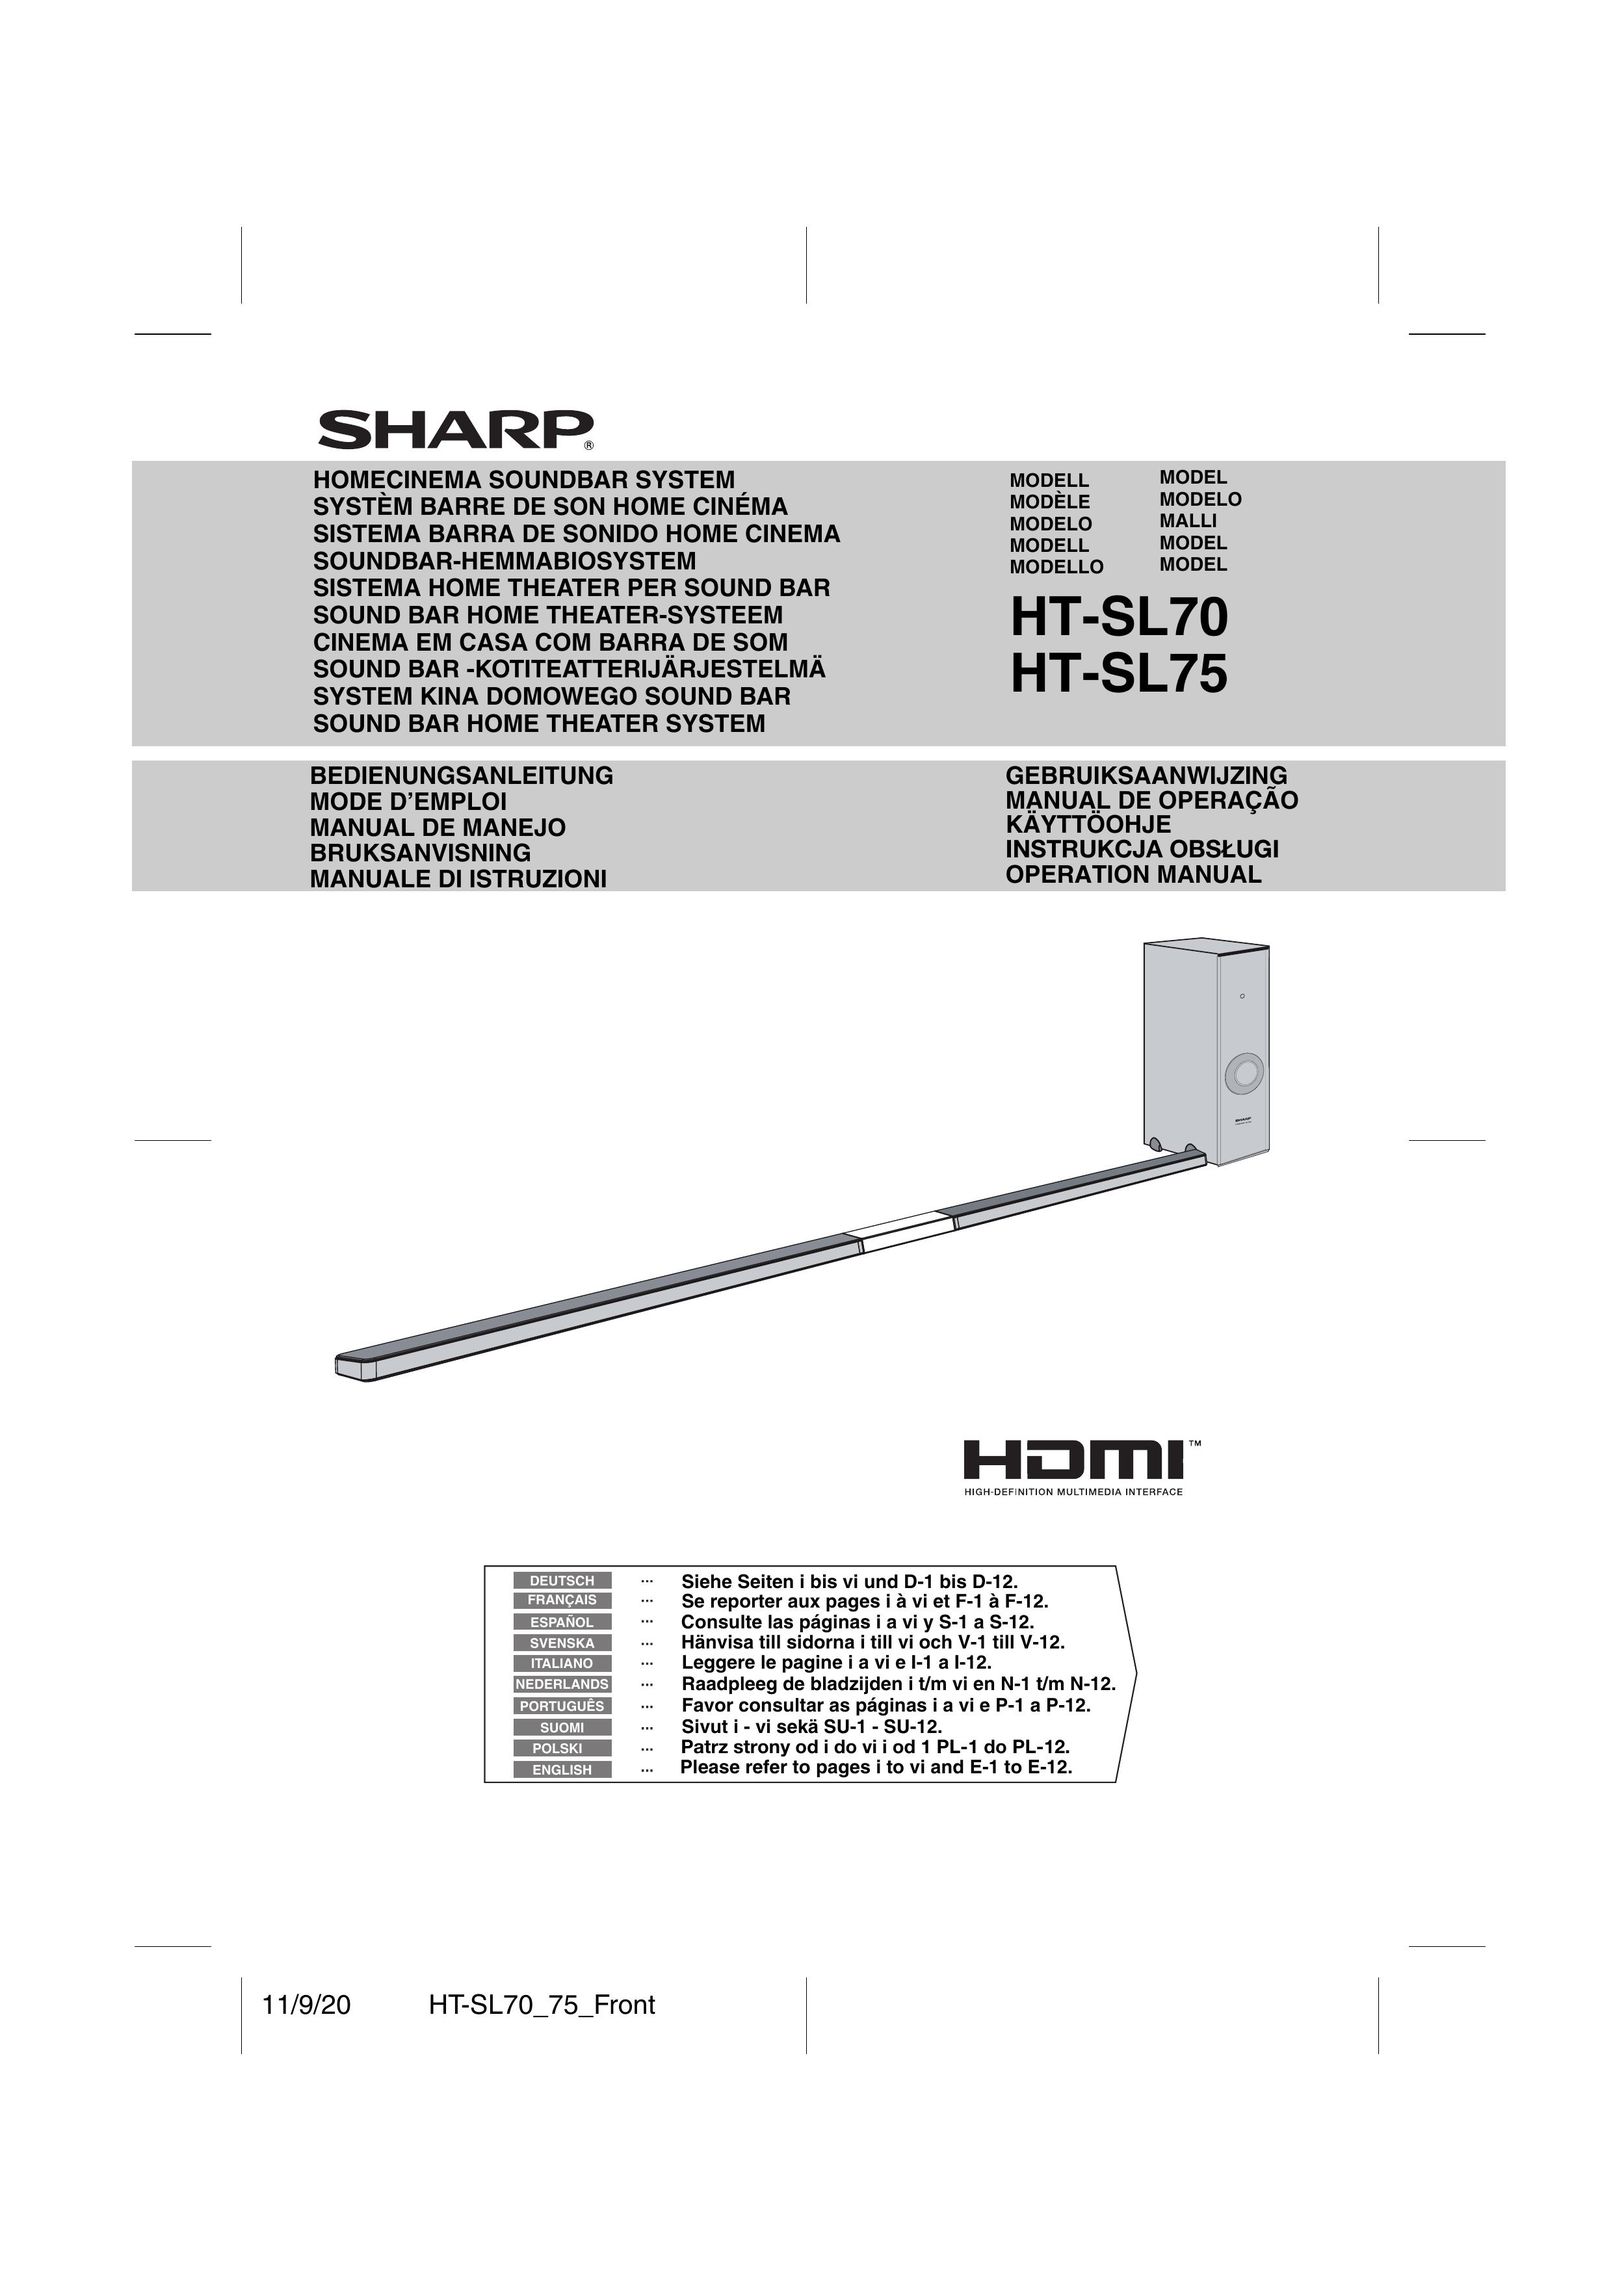 Sharp HT-SL70 Home Theater System User Manual